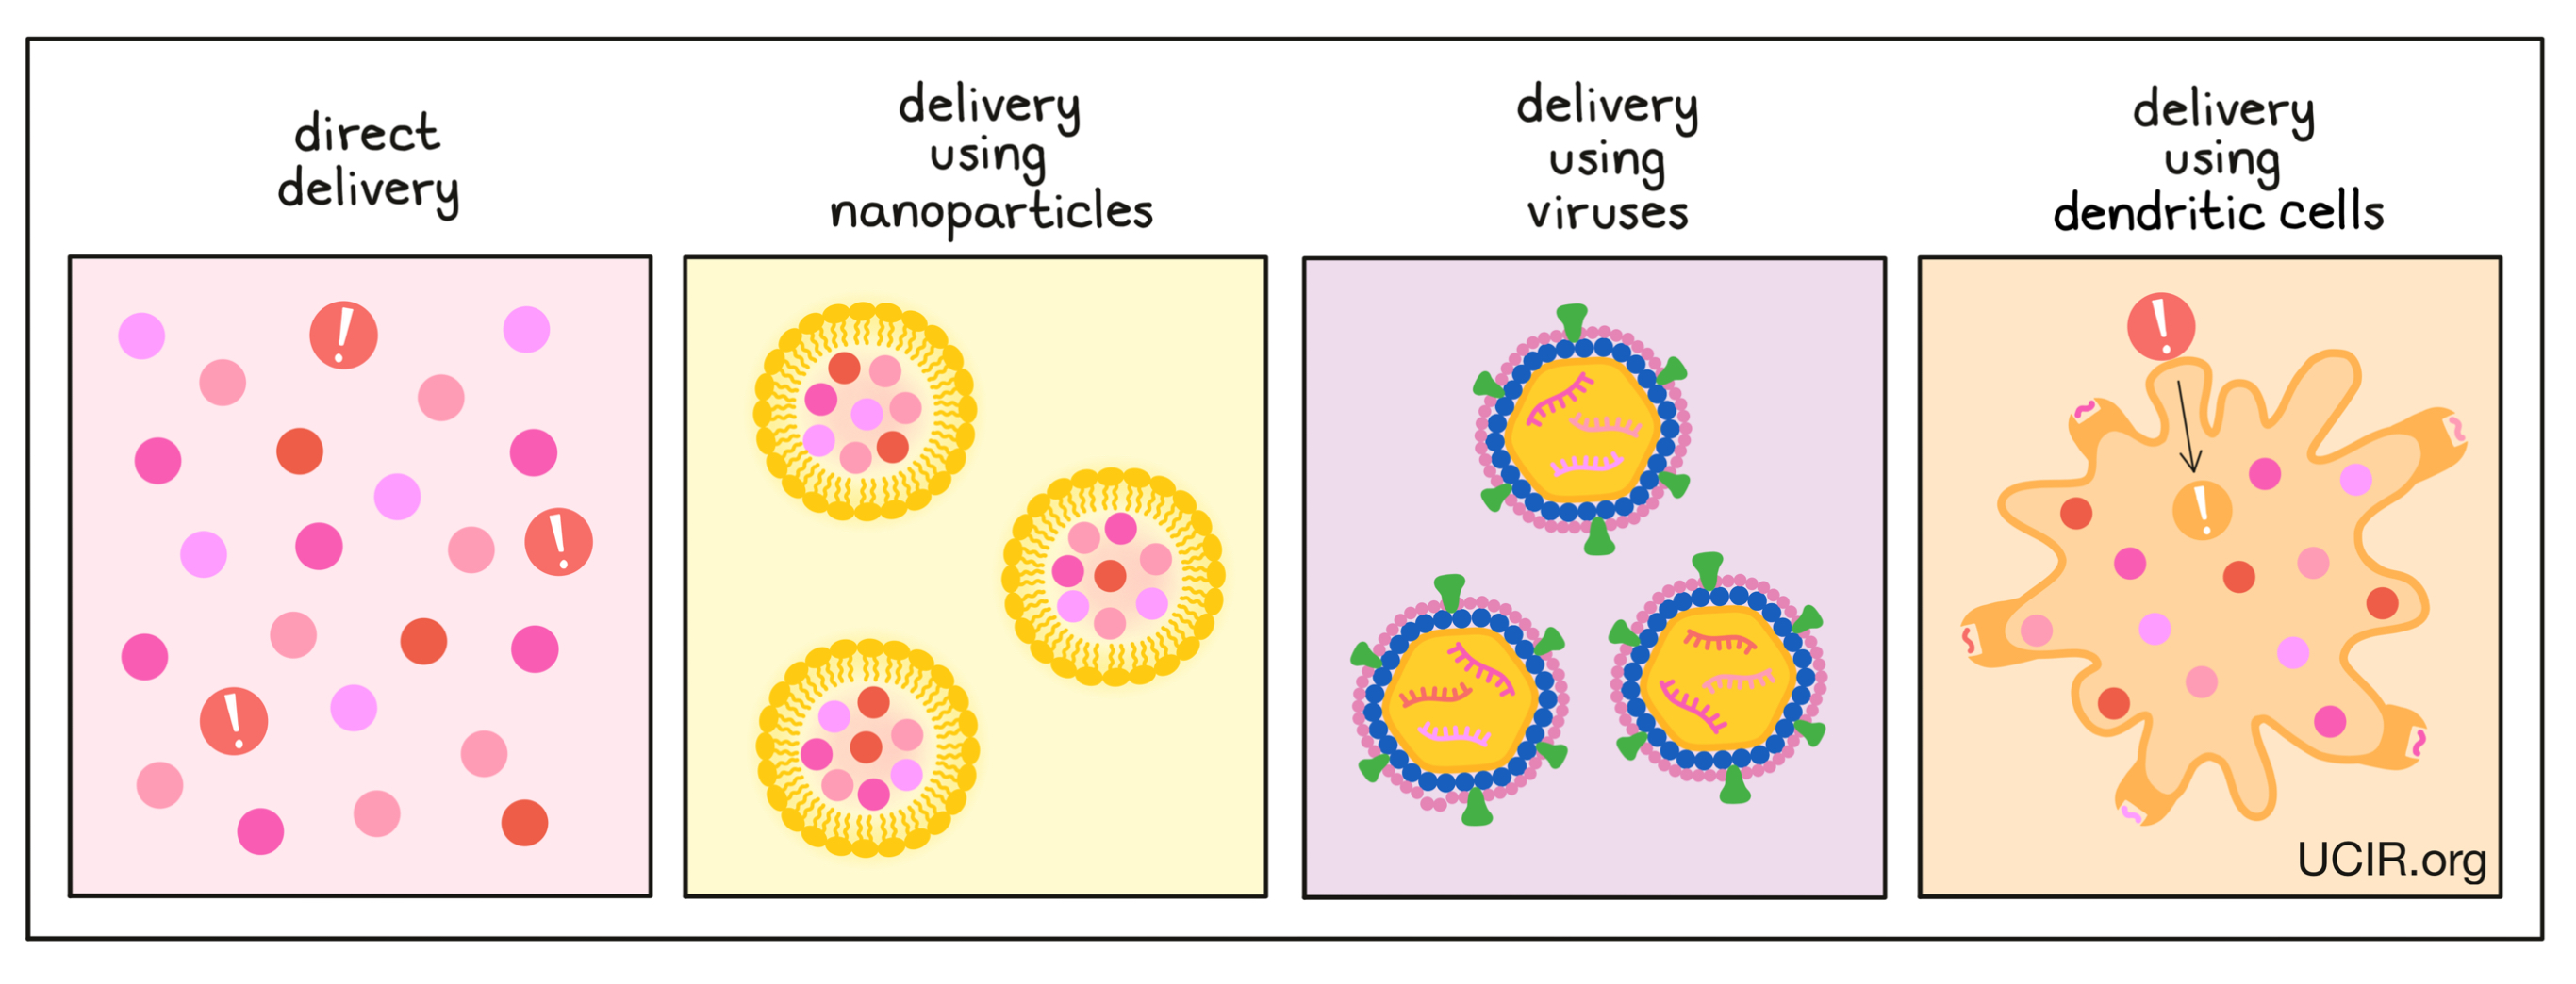 Illustration showing the different delivery methods